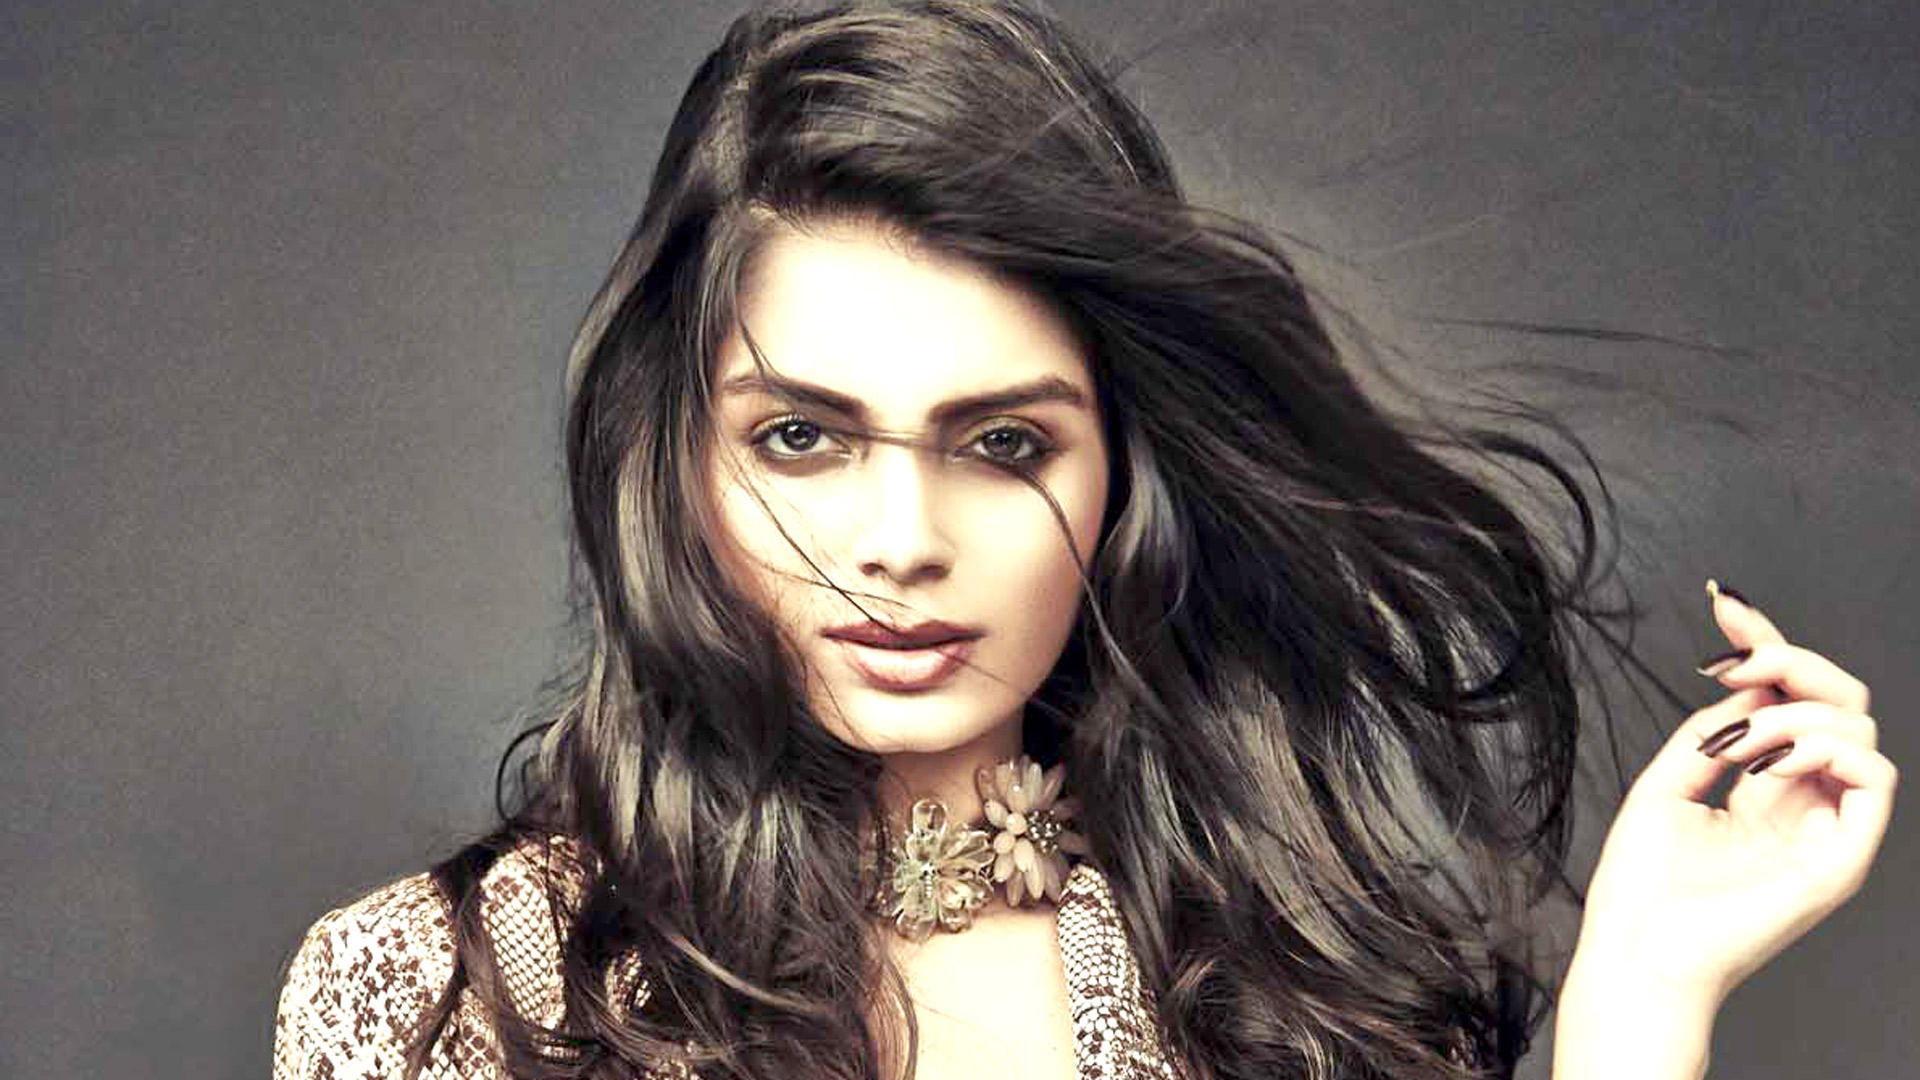 Sonali Raut Wallpapers and Photos